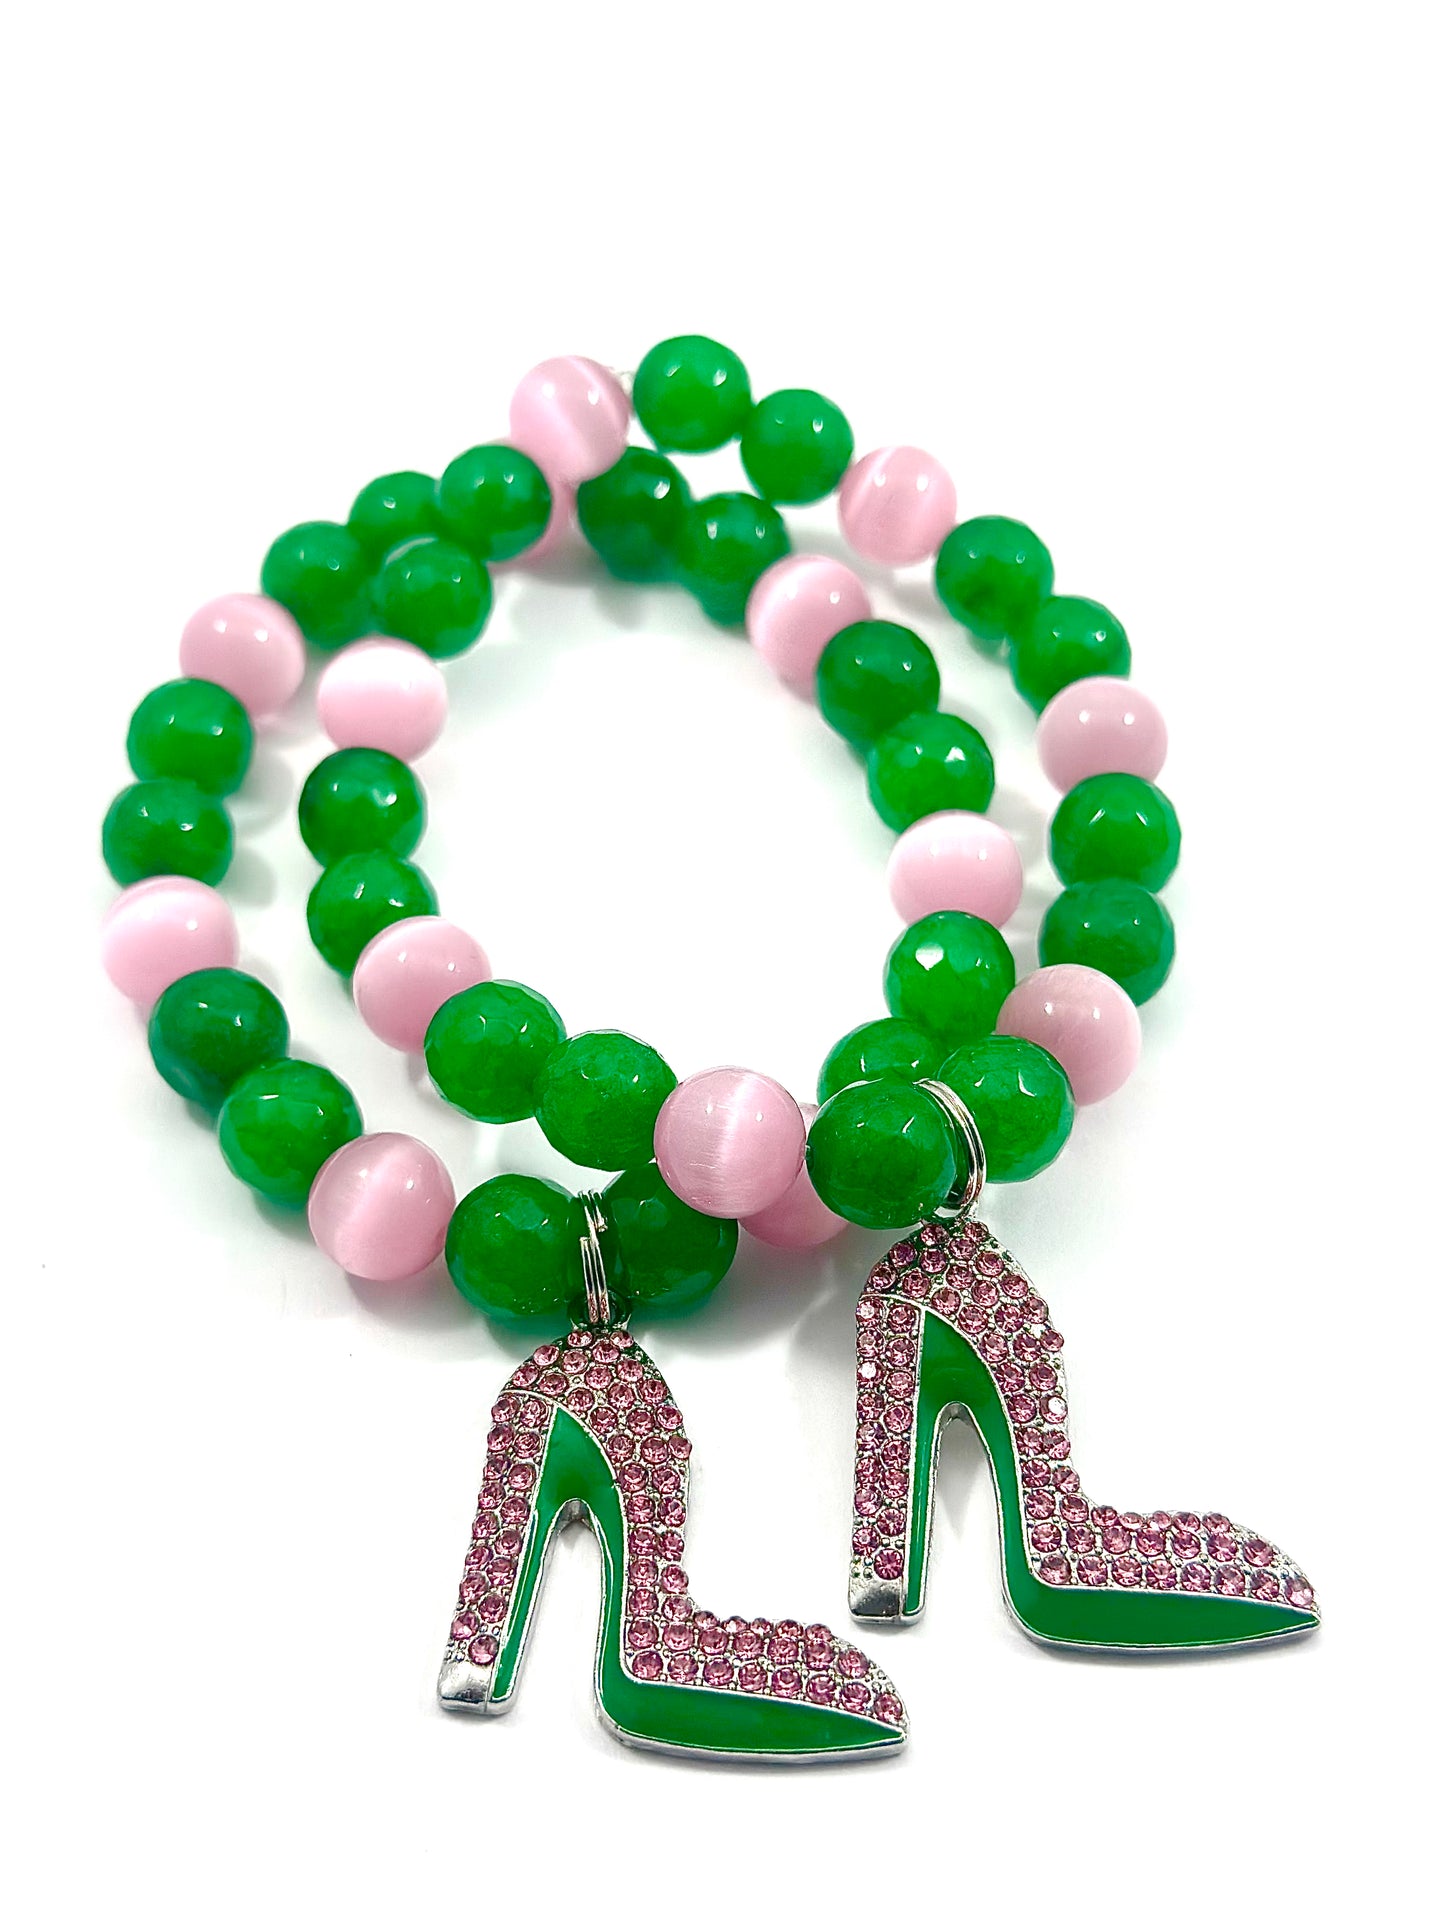 Pink and green stiletto